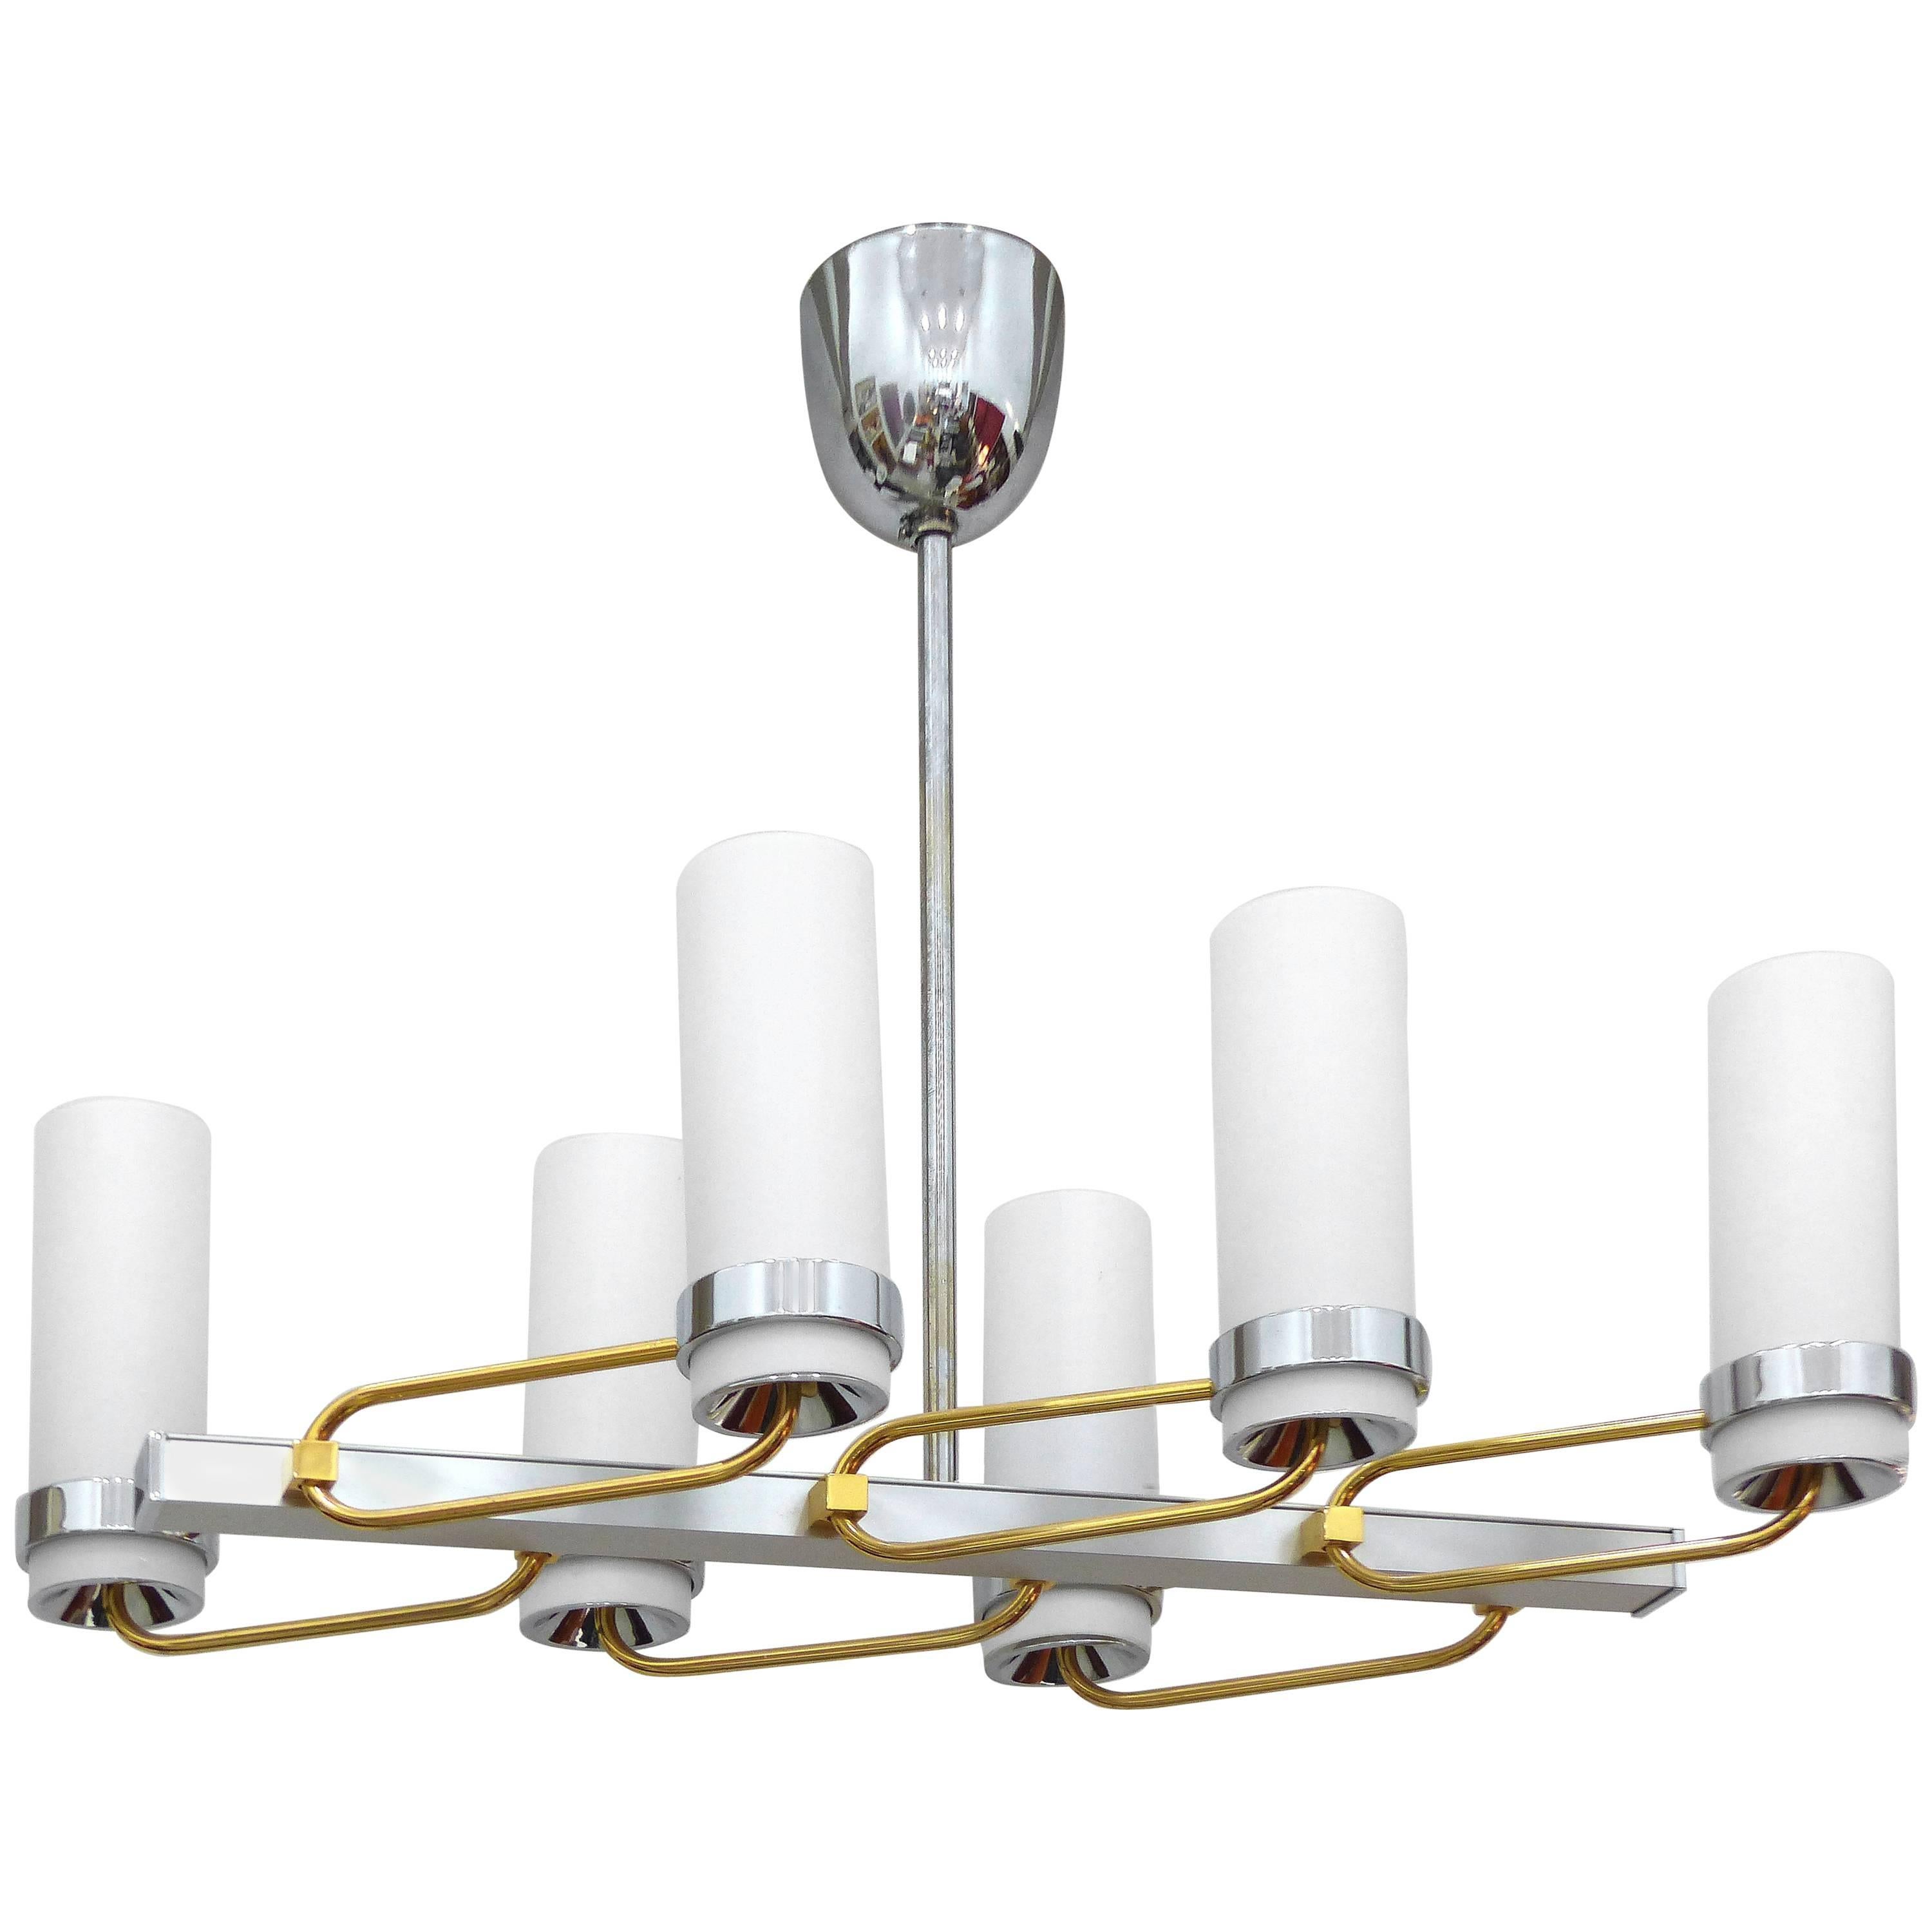 Mid-Century Modern Two-Tone Chandelier with Glass Shades